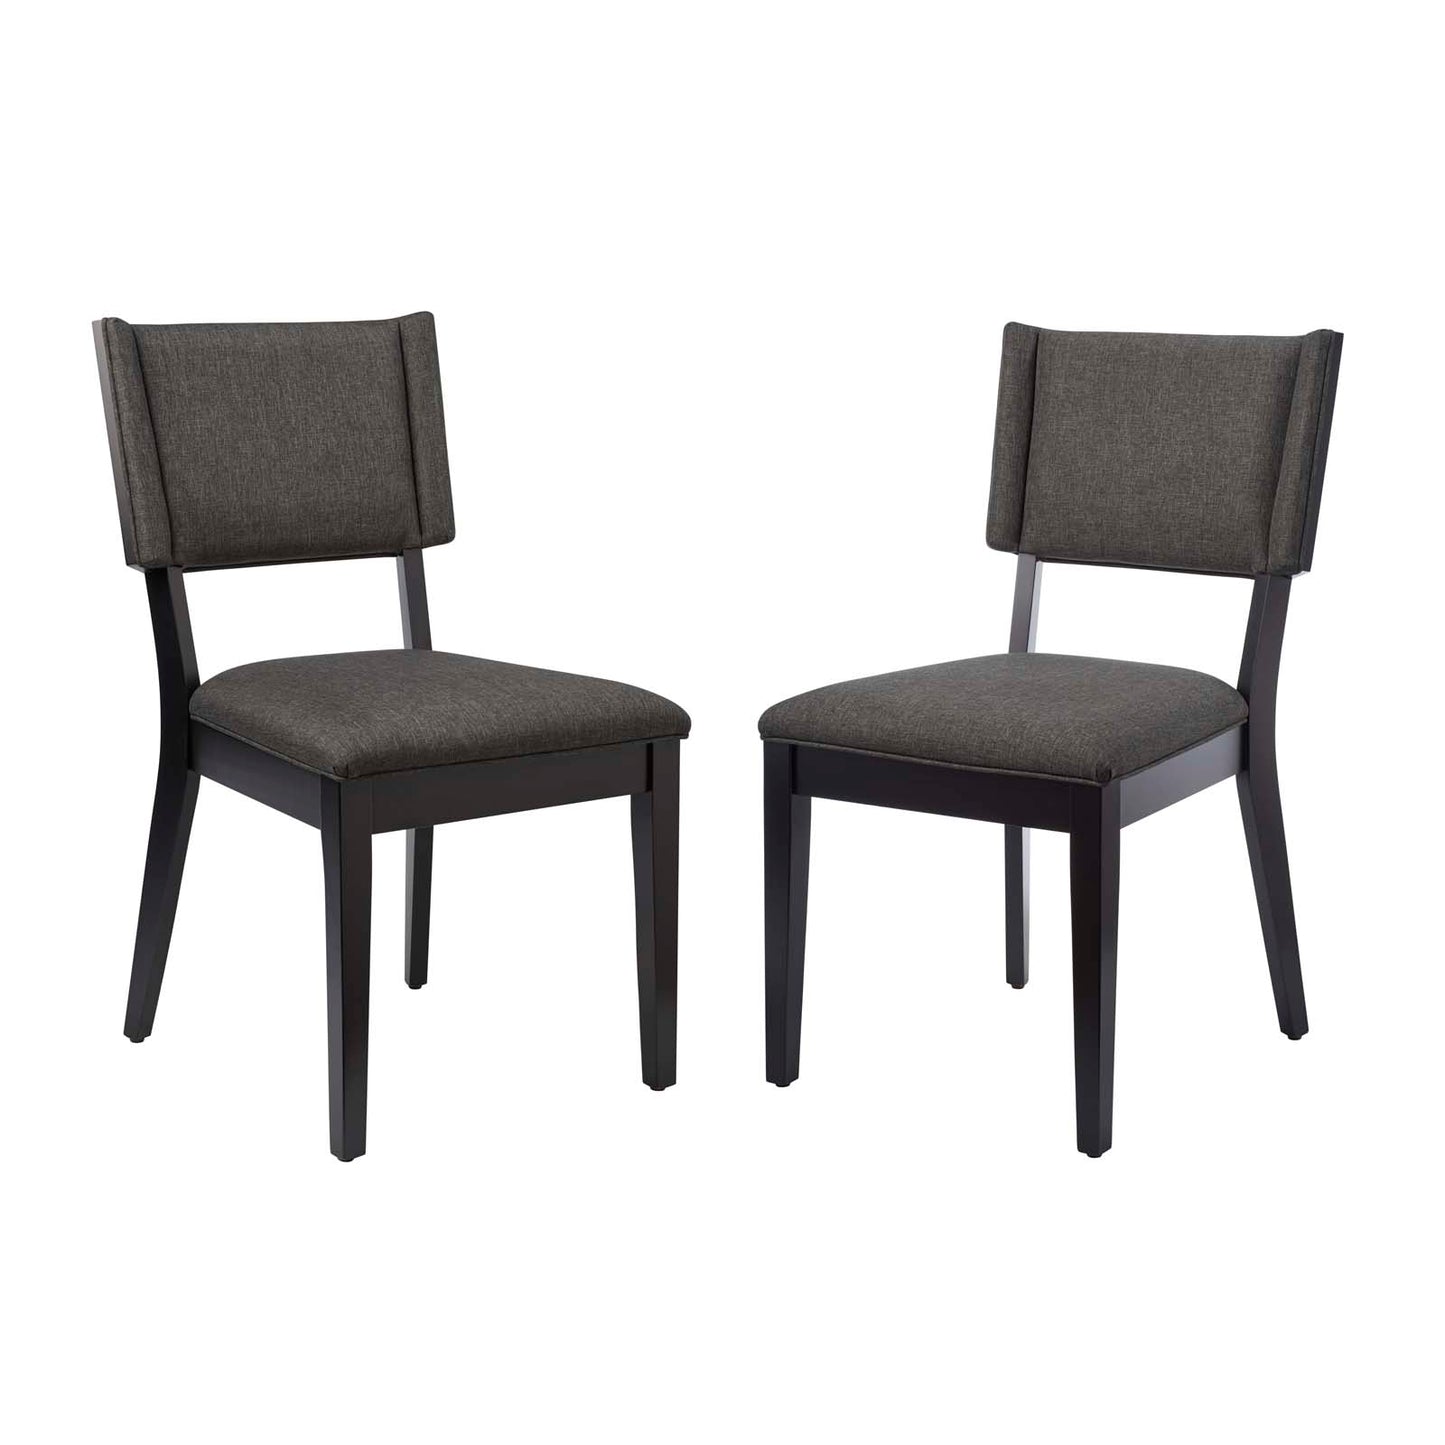 Esquire Dining Chairs - Set of 2 Gray EEI-4559-GRY